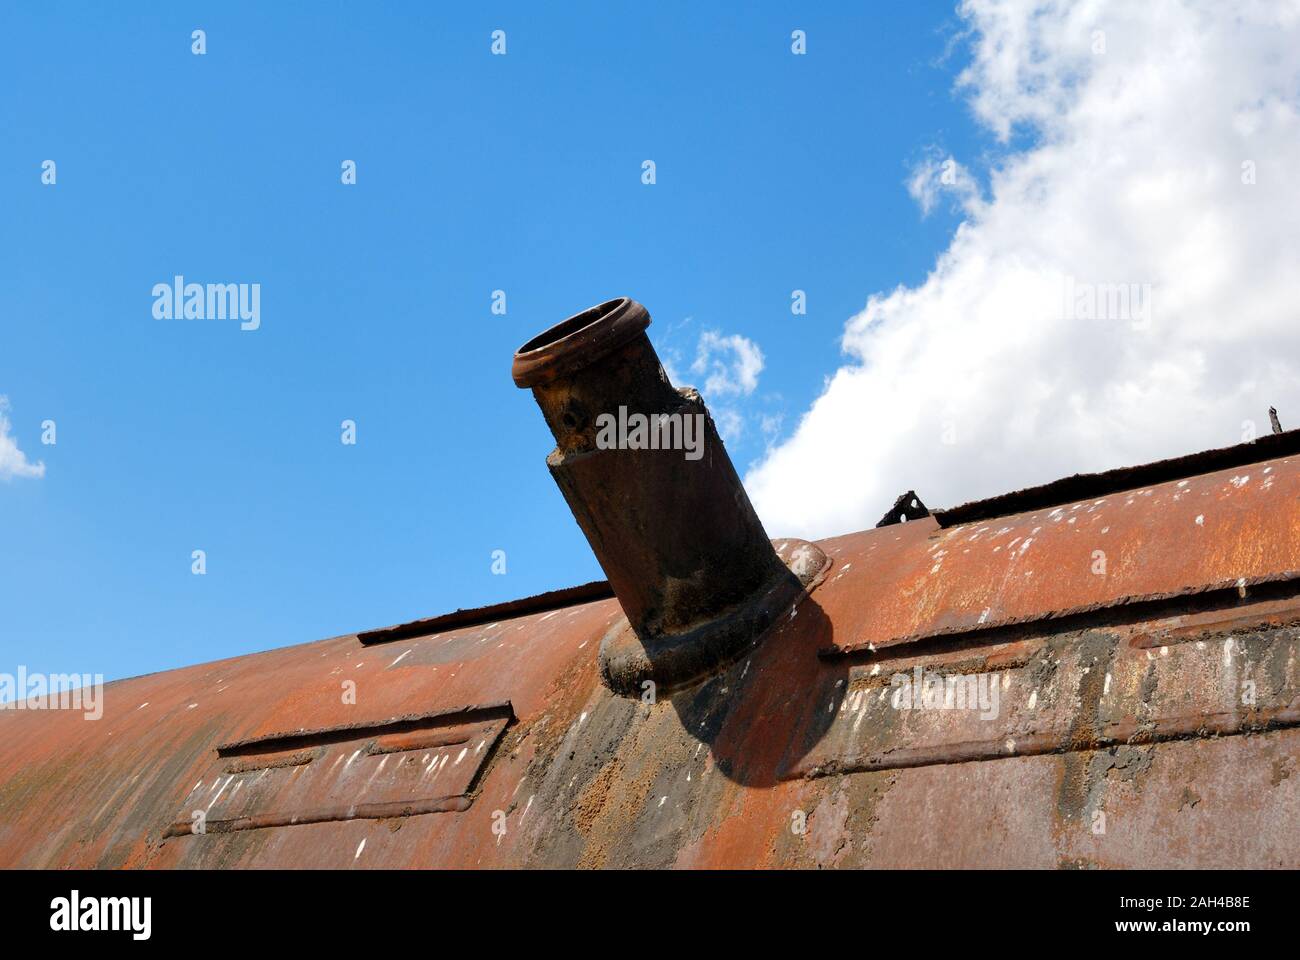 Mouth of the bulk-oil tank on a background of the blue sky with a cloud Stock Photo